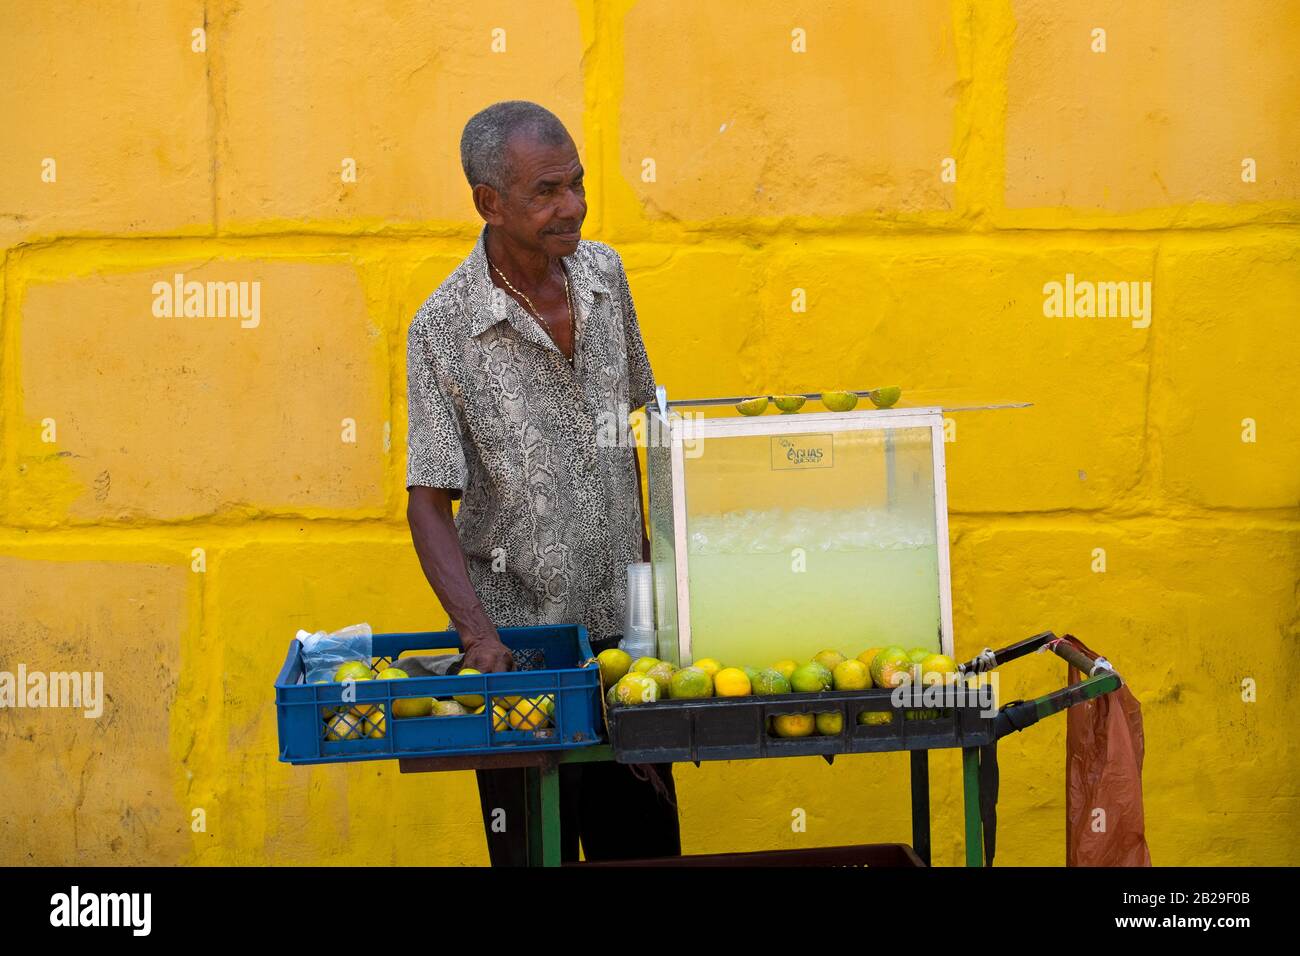 A man sells lemonade on a street in Cartagena, Colombia Stock Photo